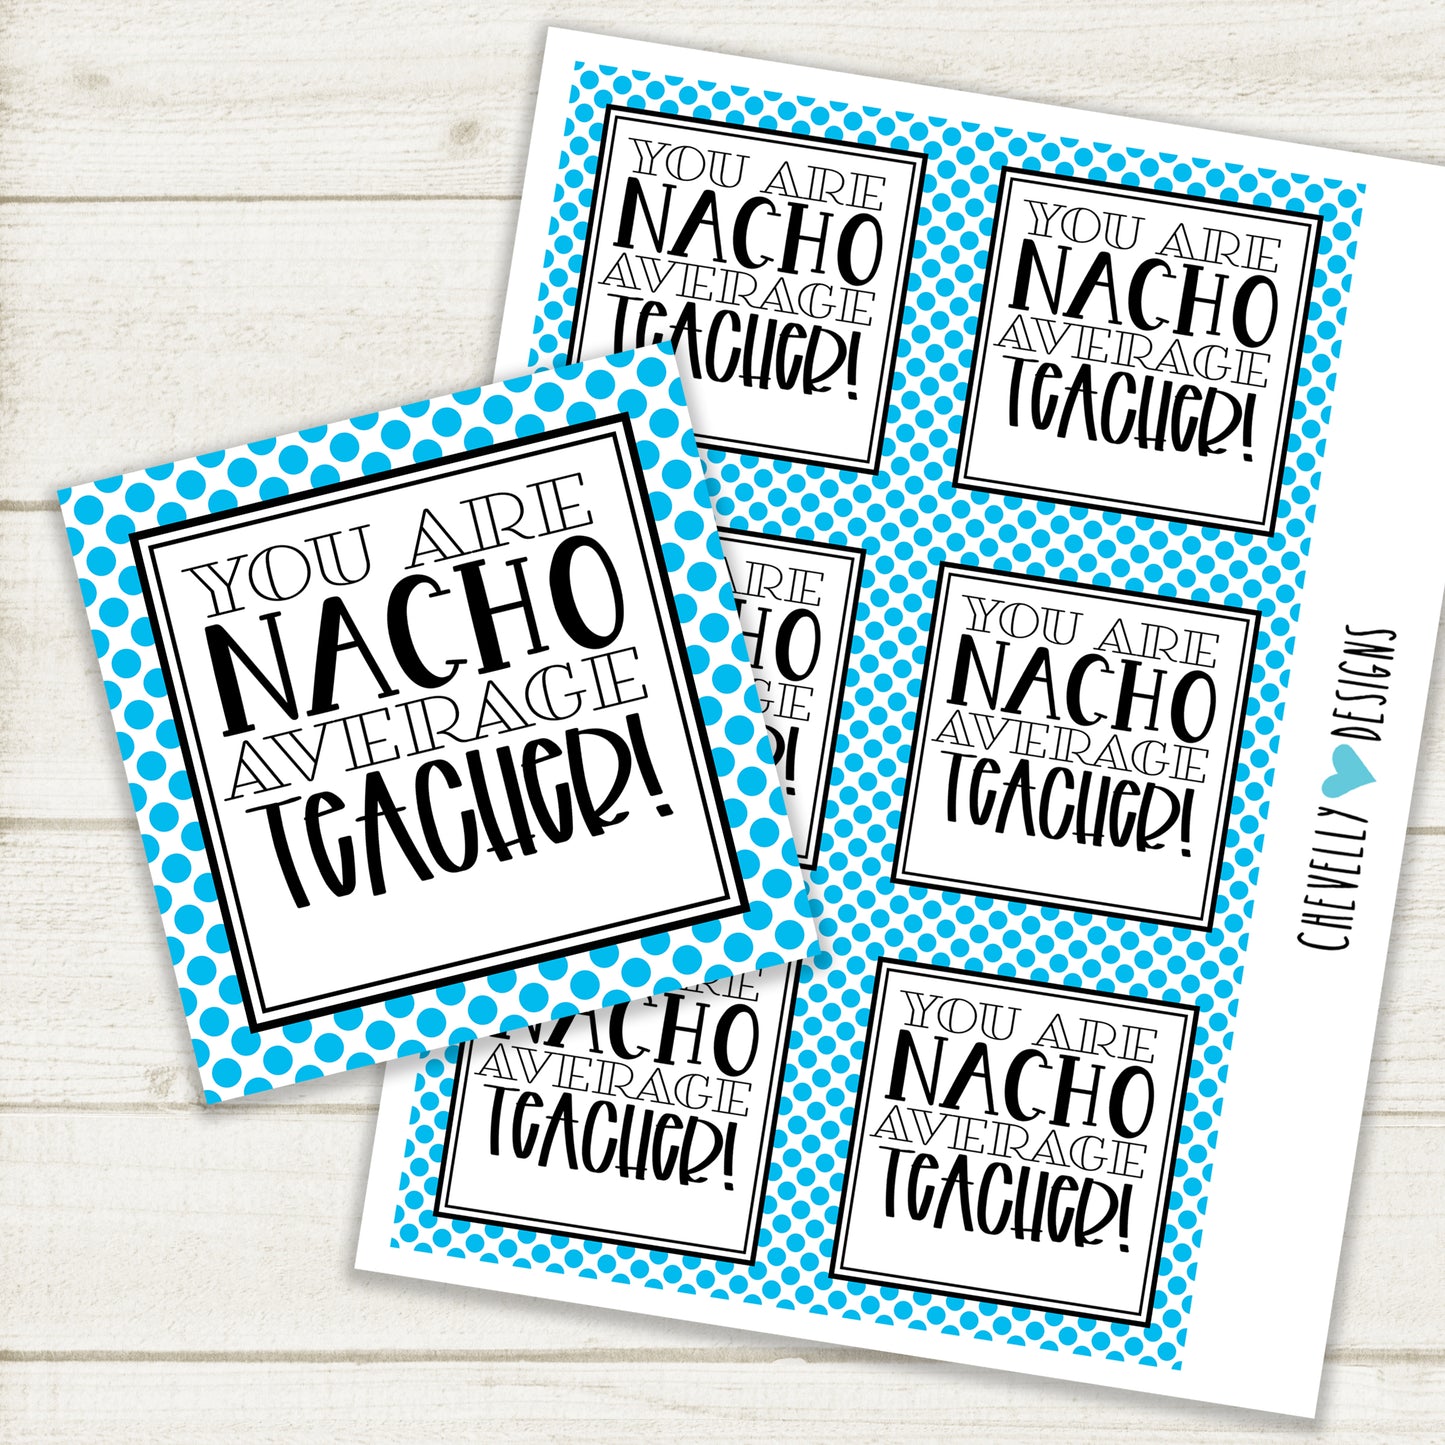 "You are NACHO Average Teacher" - Printable Appreciation Gift Tags | Printable - Instant Digital Download